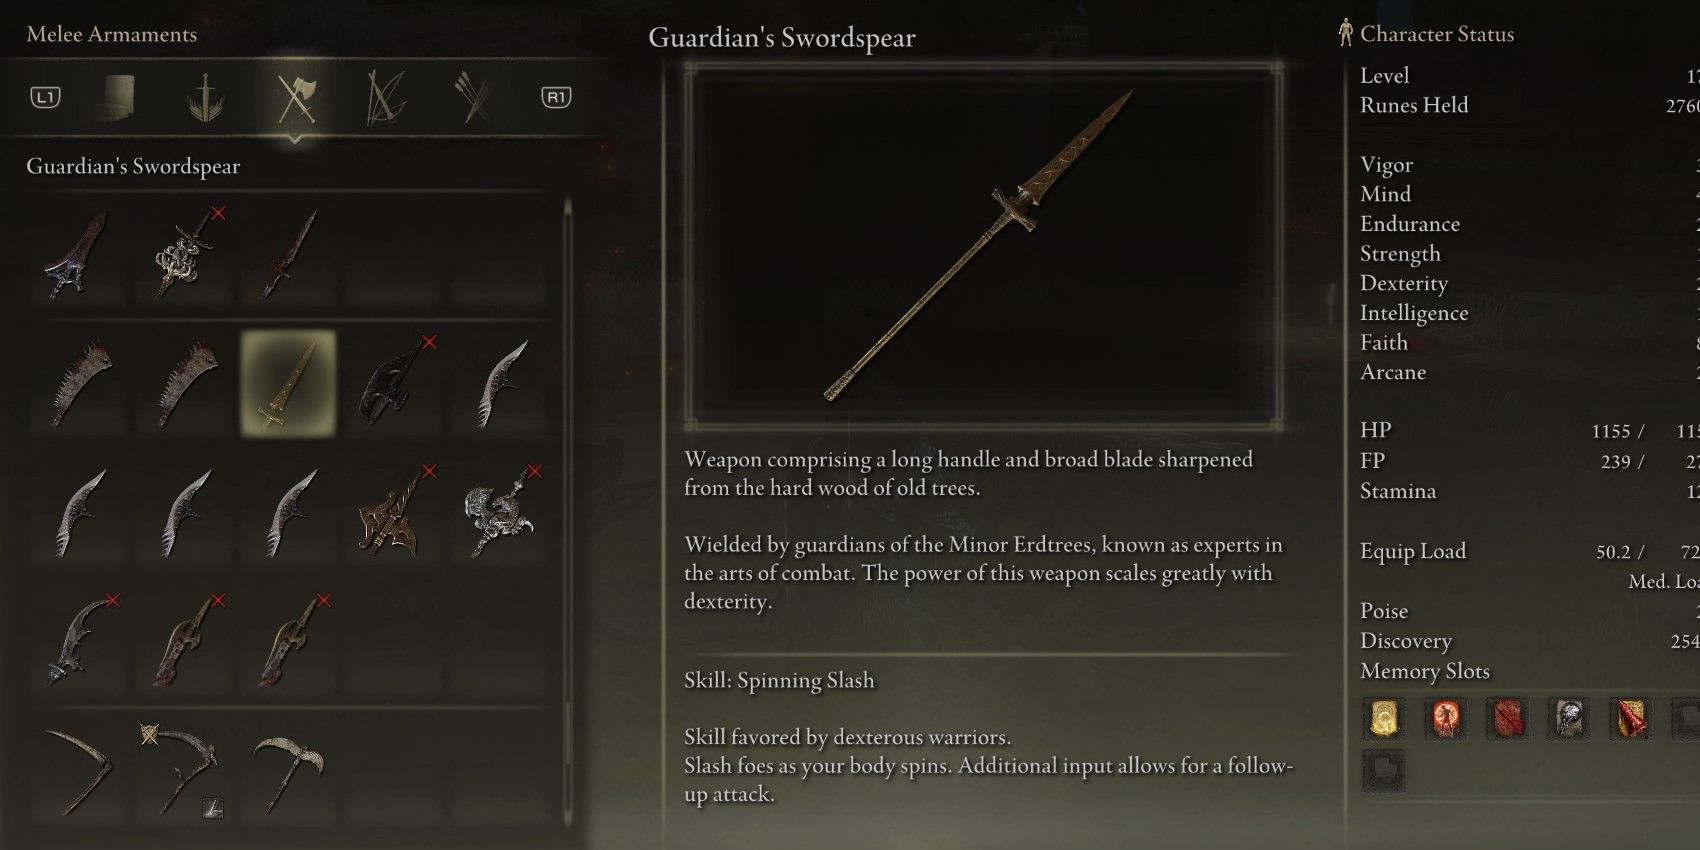 A Guardian's Swordspear with Keen Affinity has an A scaling in Dexterity.